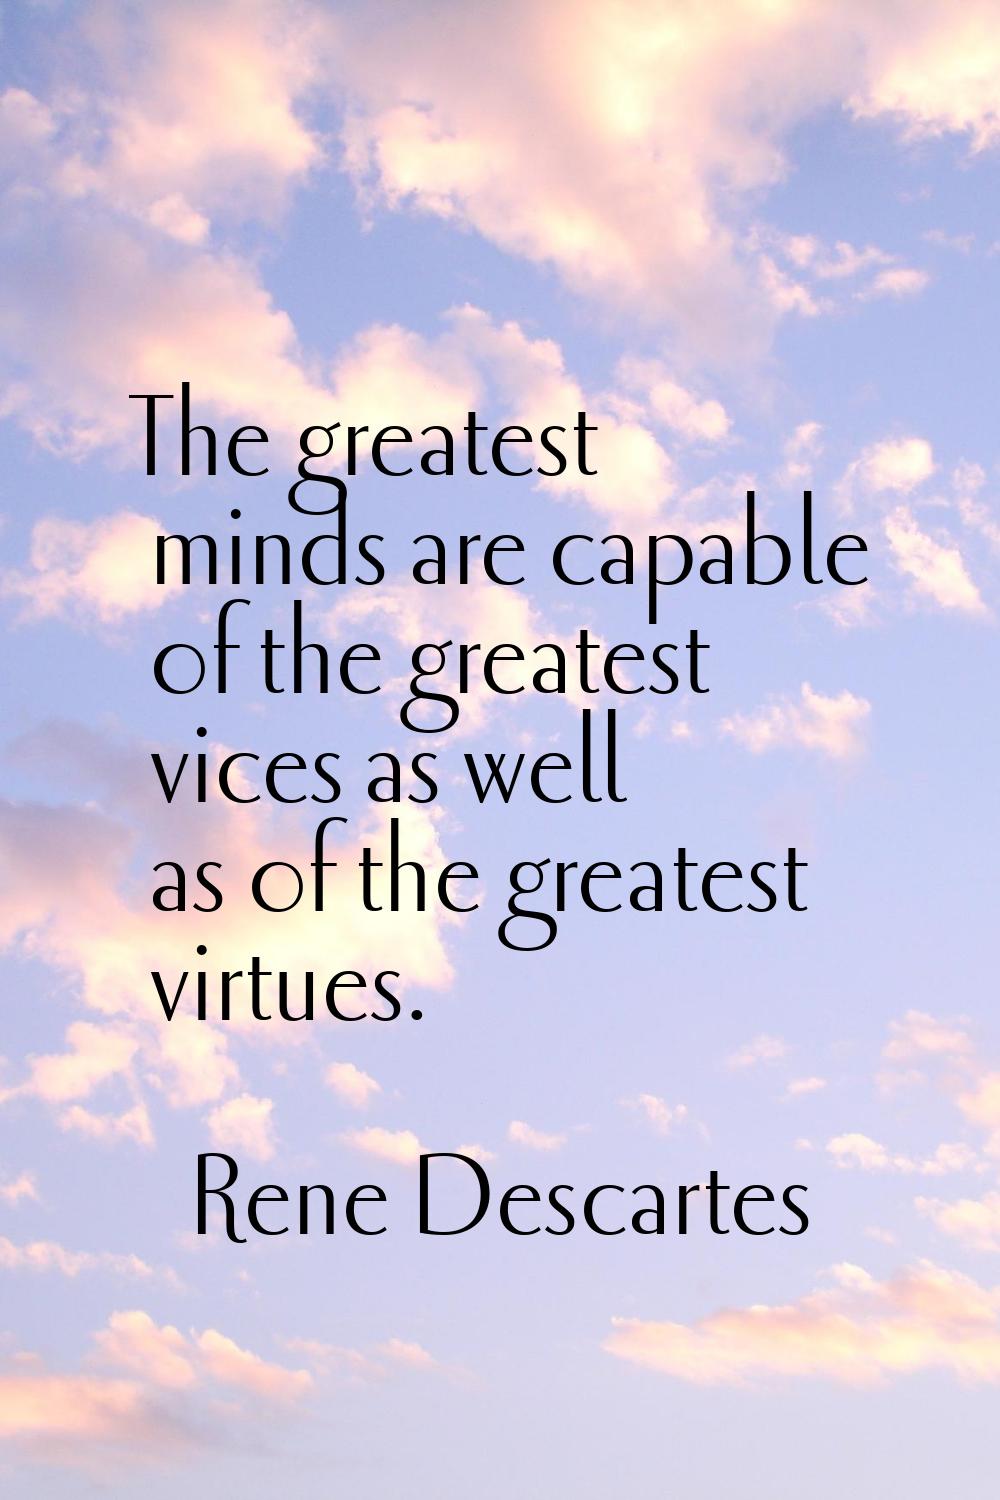 The greatest minds are capable of the greatest vices as well as of the greatest virtues.